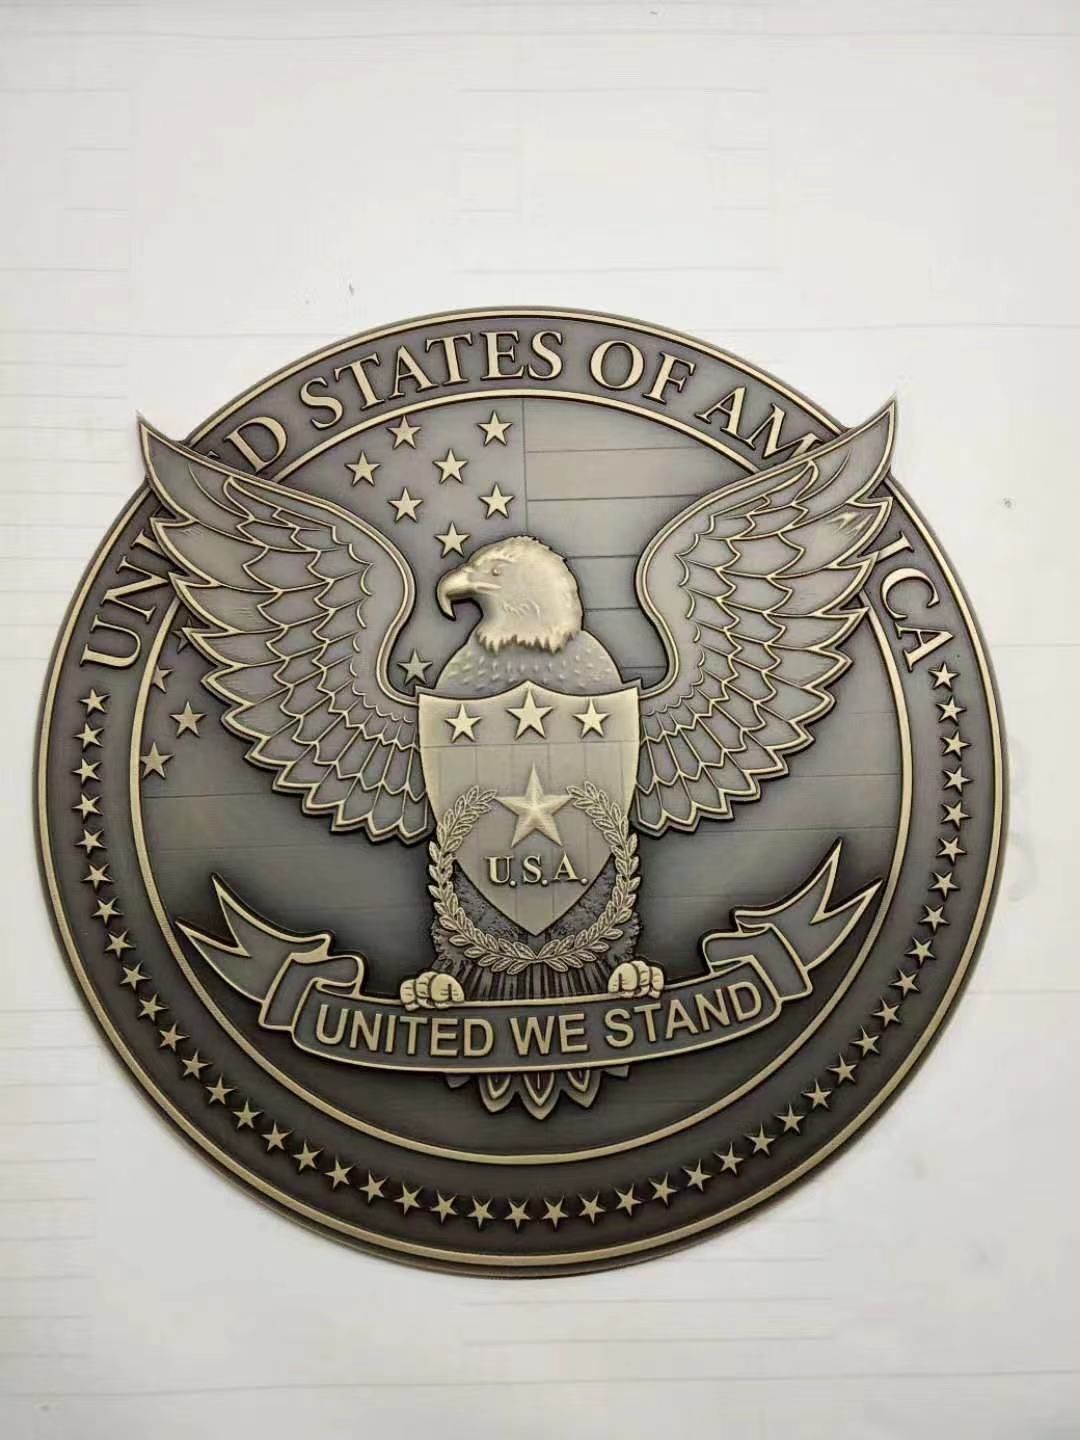 MA1163 - Plaque of Eagle Symbol on  the USA Seal,  "United We Stand". 3-D Bas-Relief